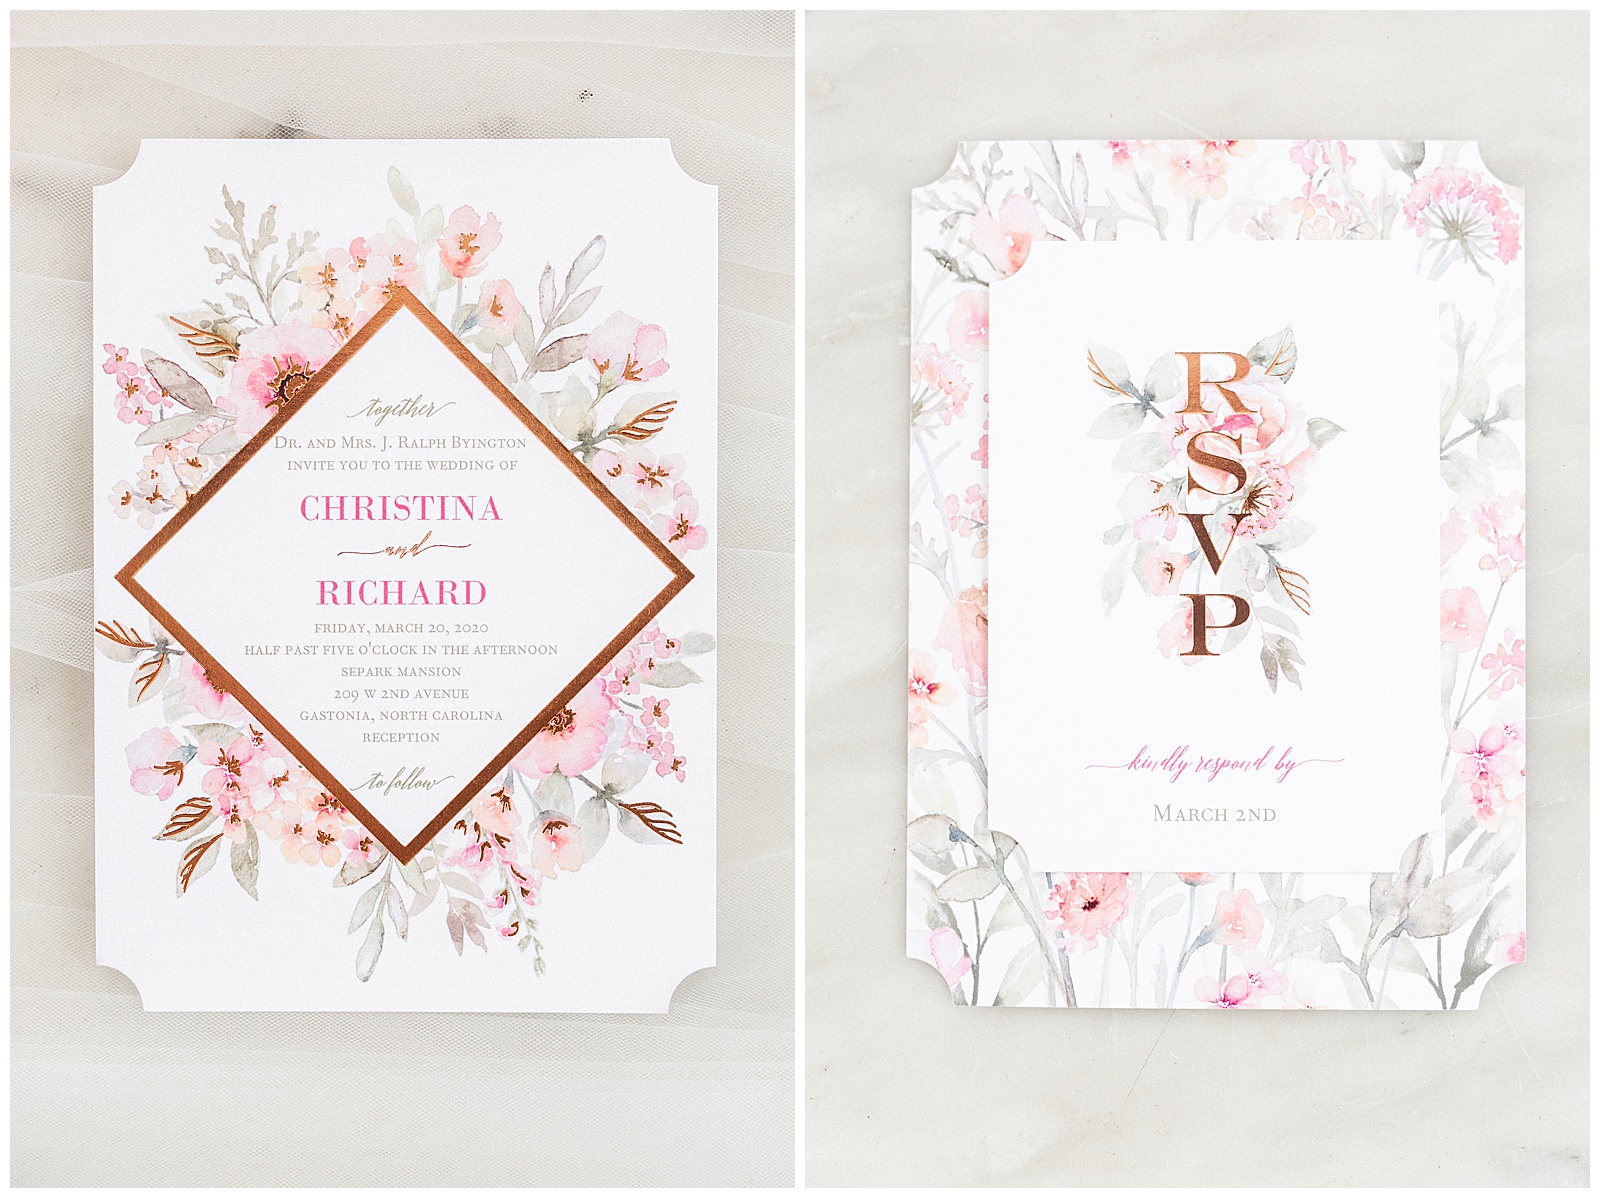 Pink Floral Wedding Invitation Suite Photos from Light and Airy Outdoor Wedding at Separk Mansion in Gastonia, NC | Kevyn Dixon Photography